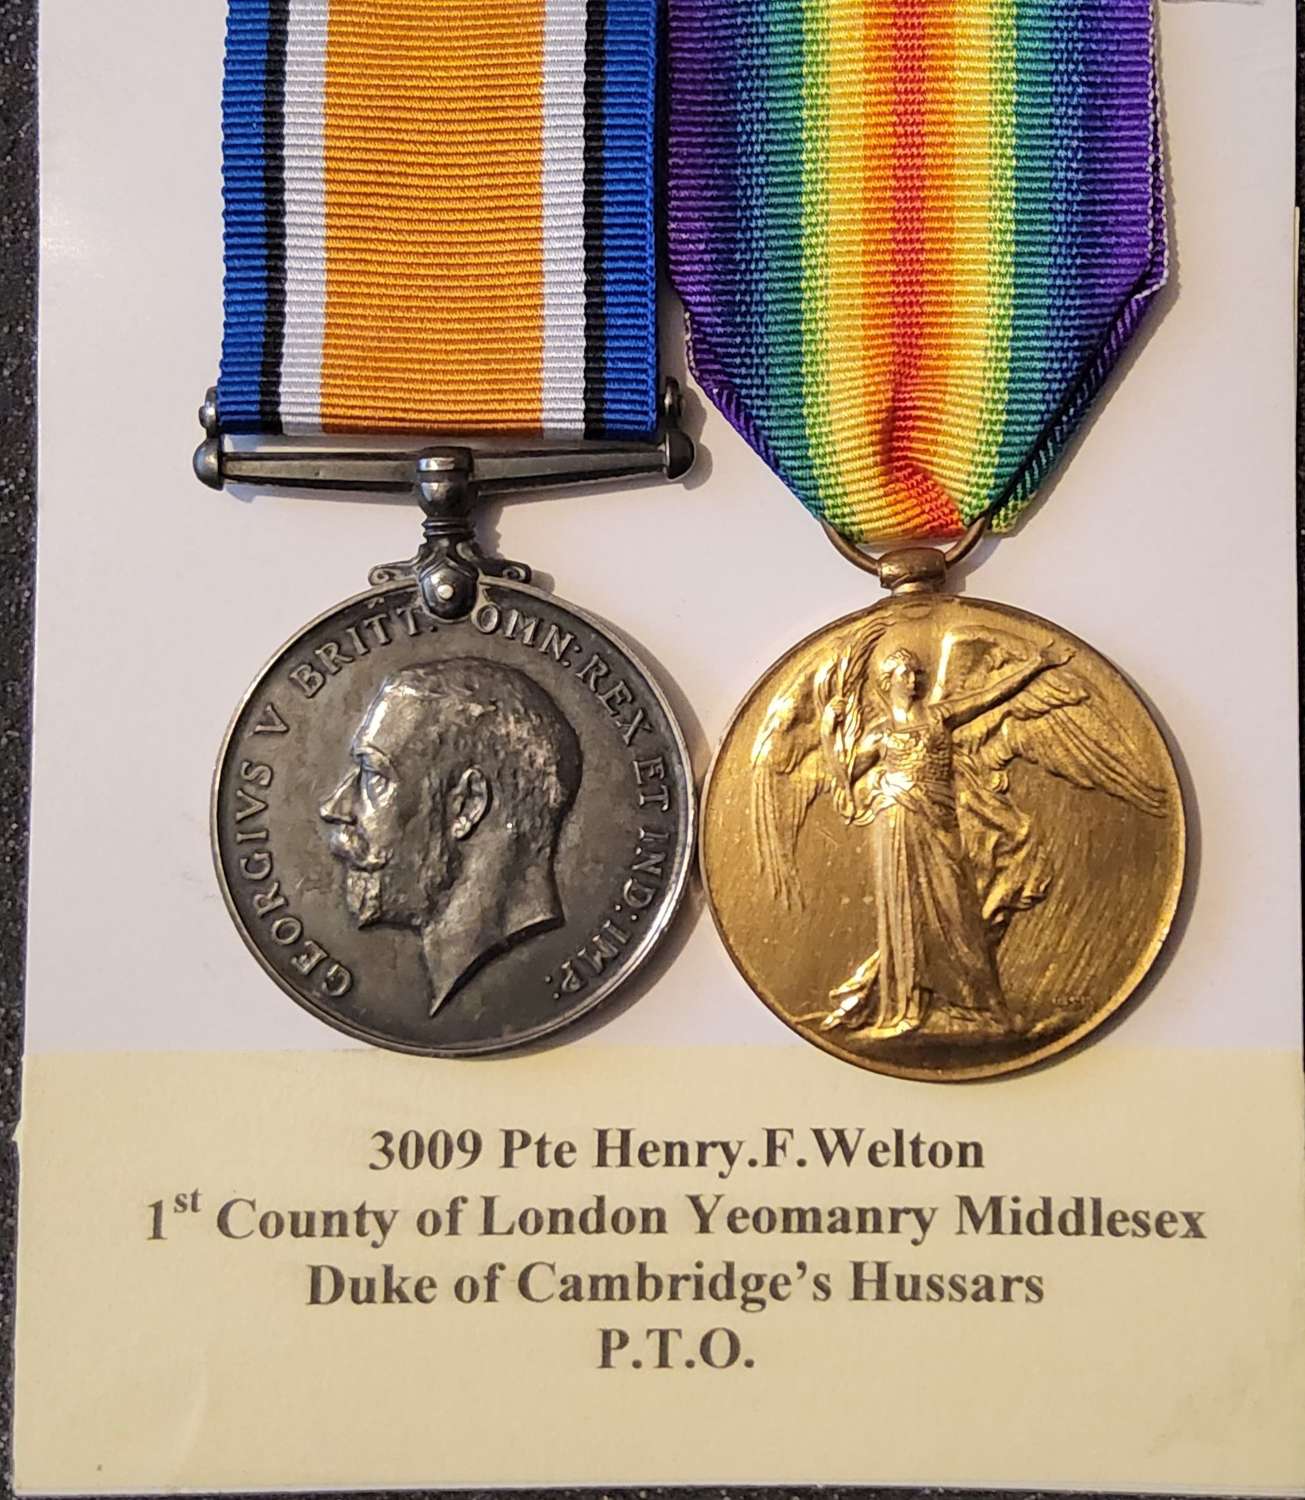 1st county of London yeomanry  middlesex, Duke of Cambridges Hussars